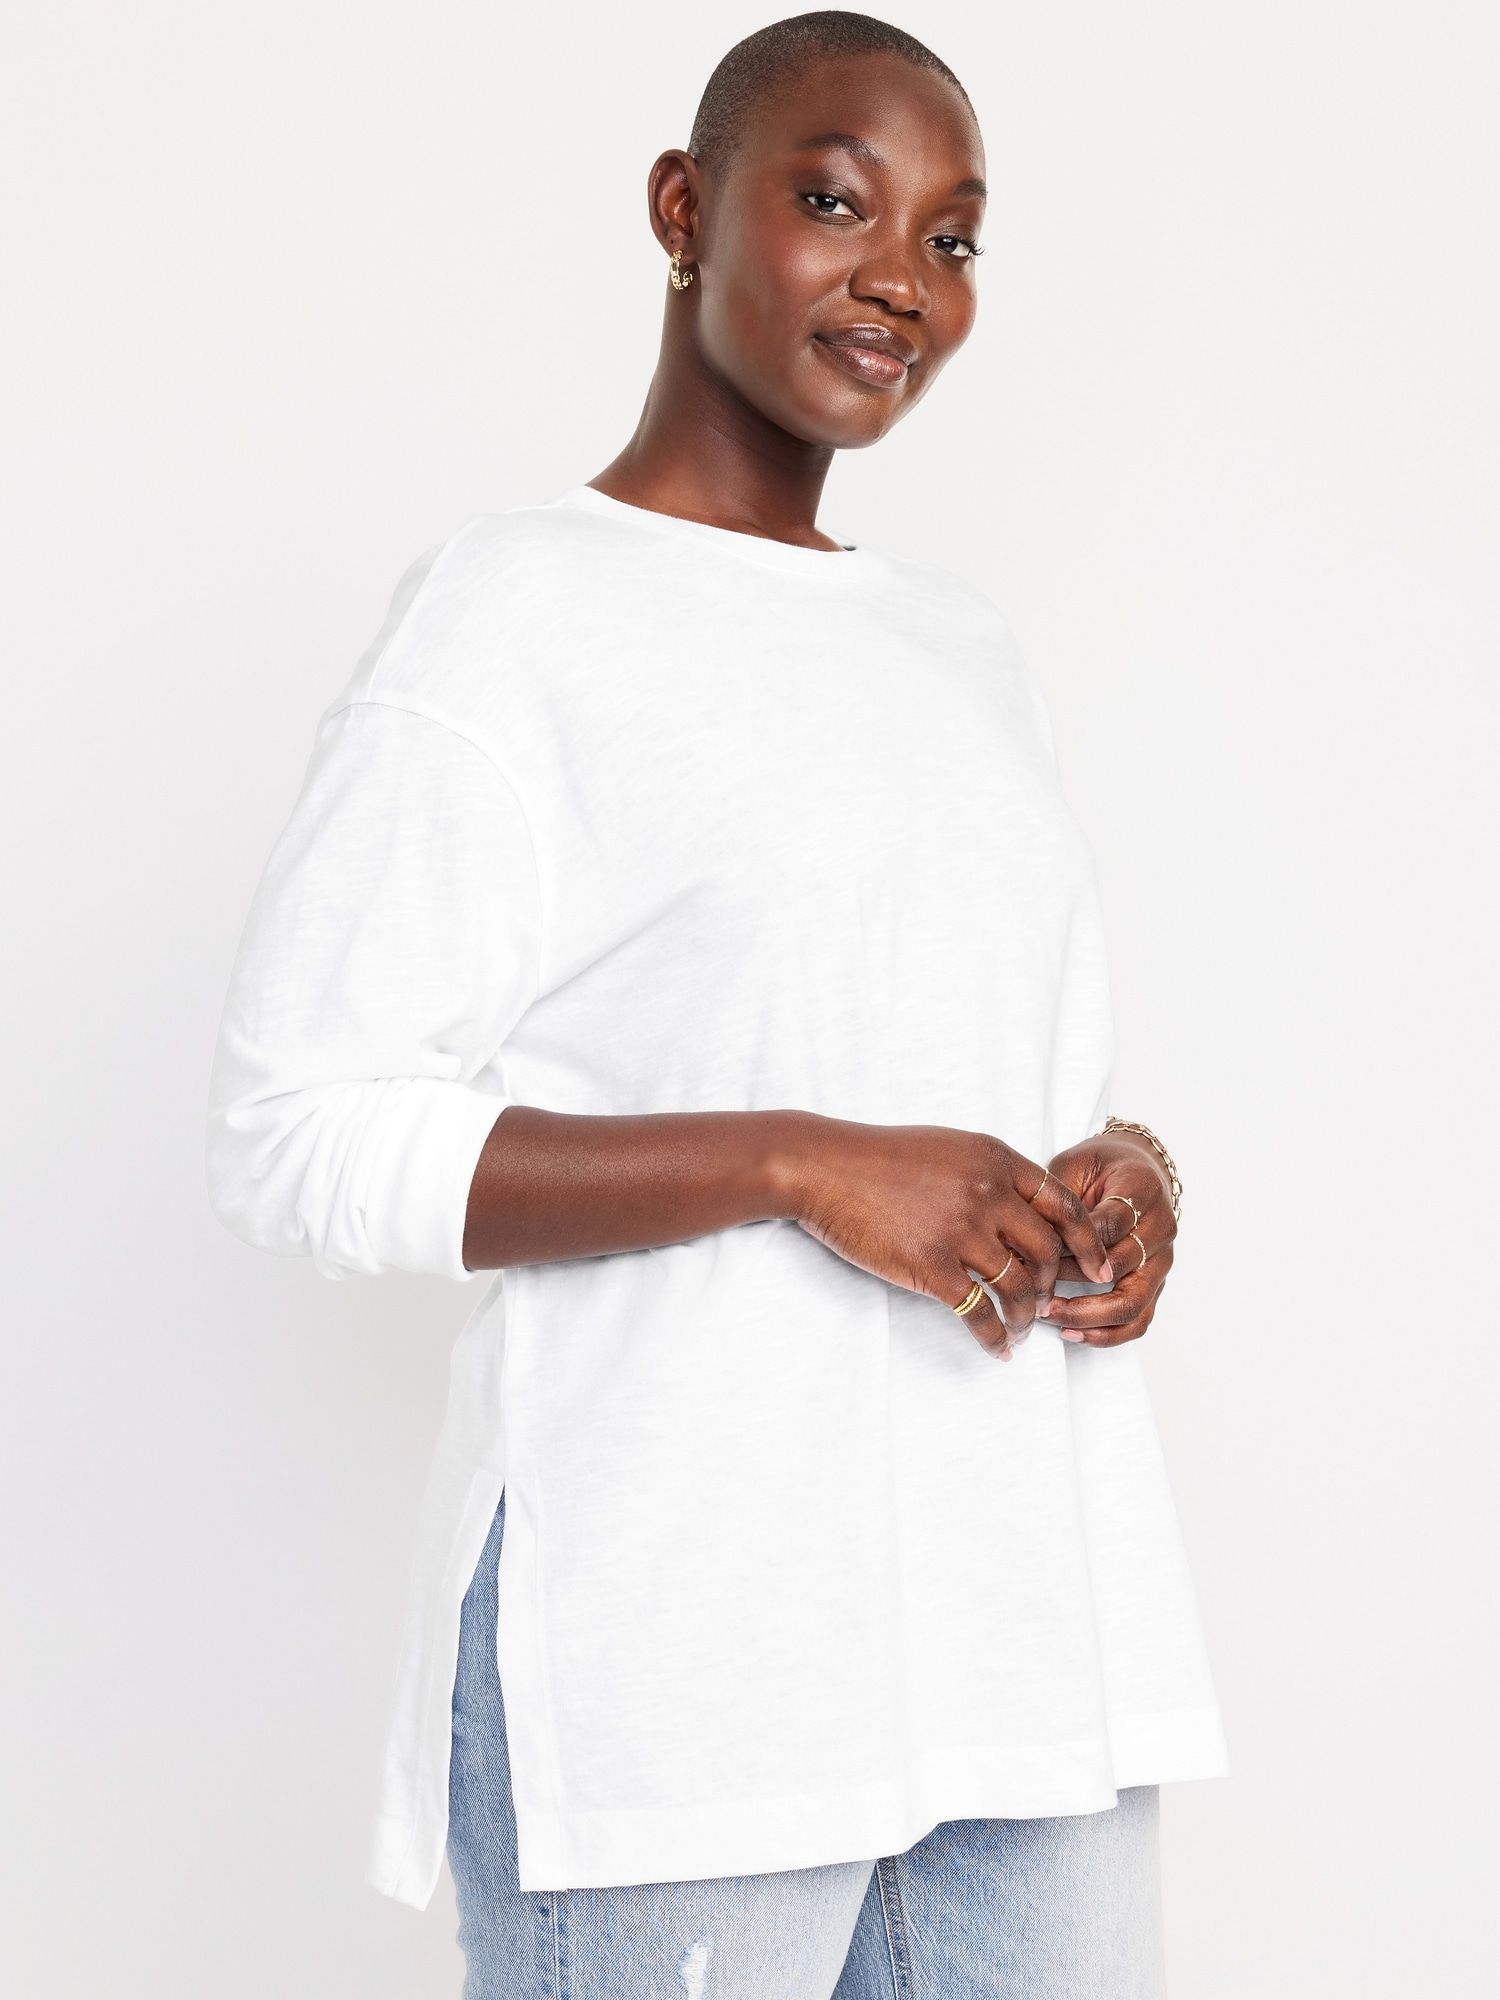 Vintage Long-Sleeve Tunic T-Shirt for Women | Old Navy